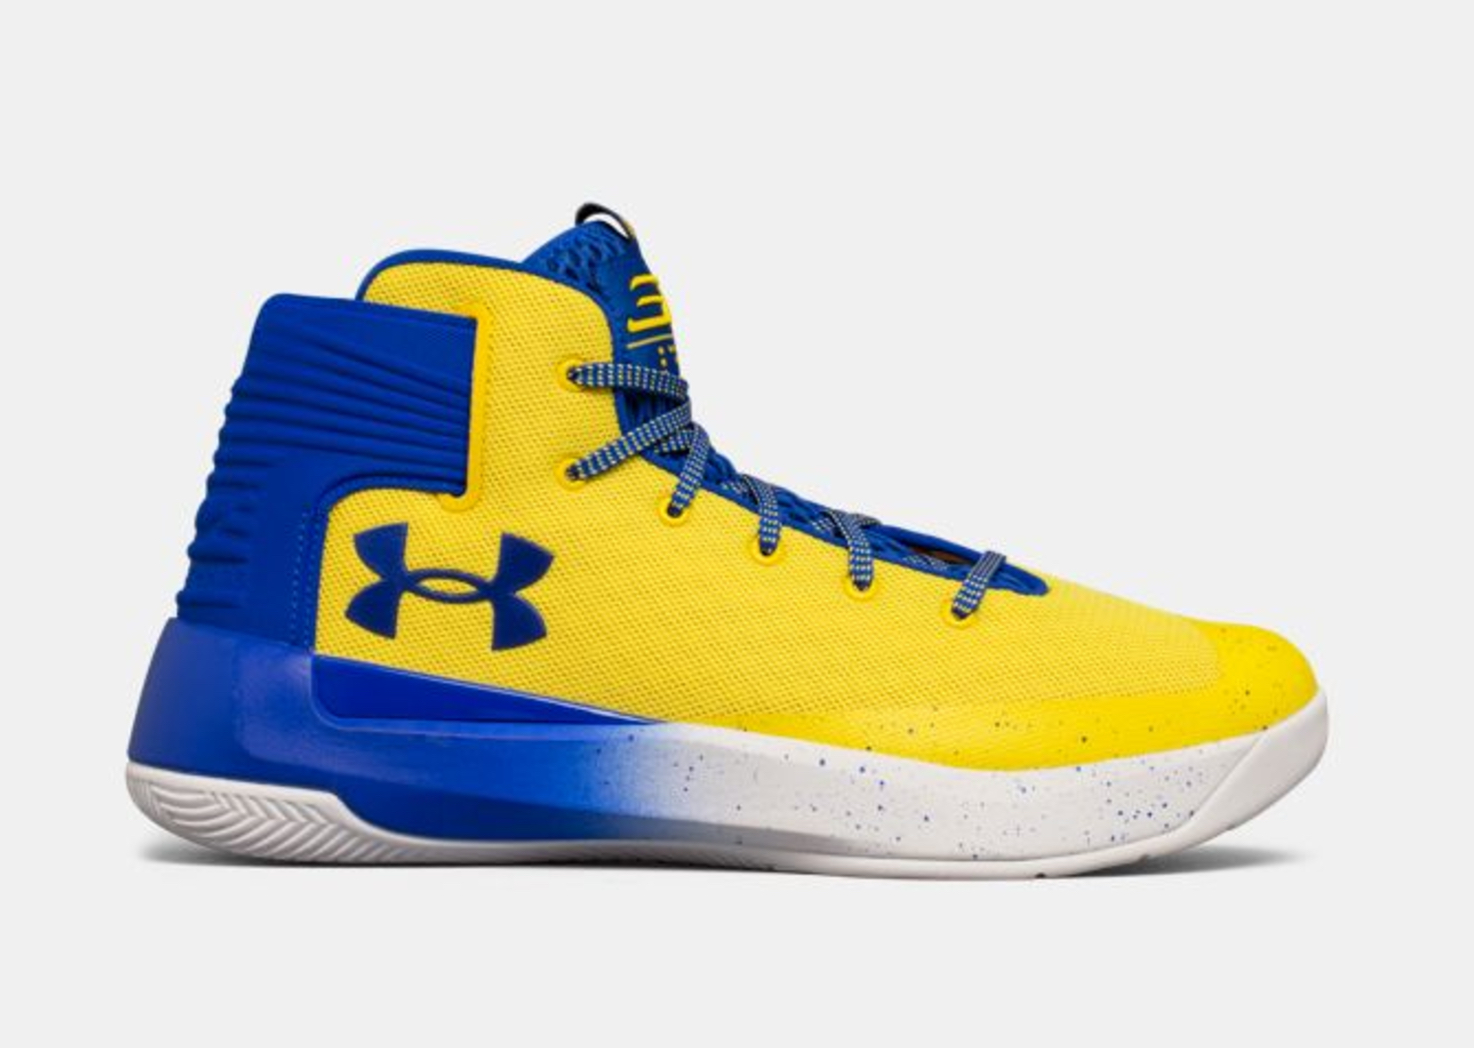 Curry 3ZER0 'Taxi 